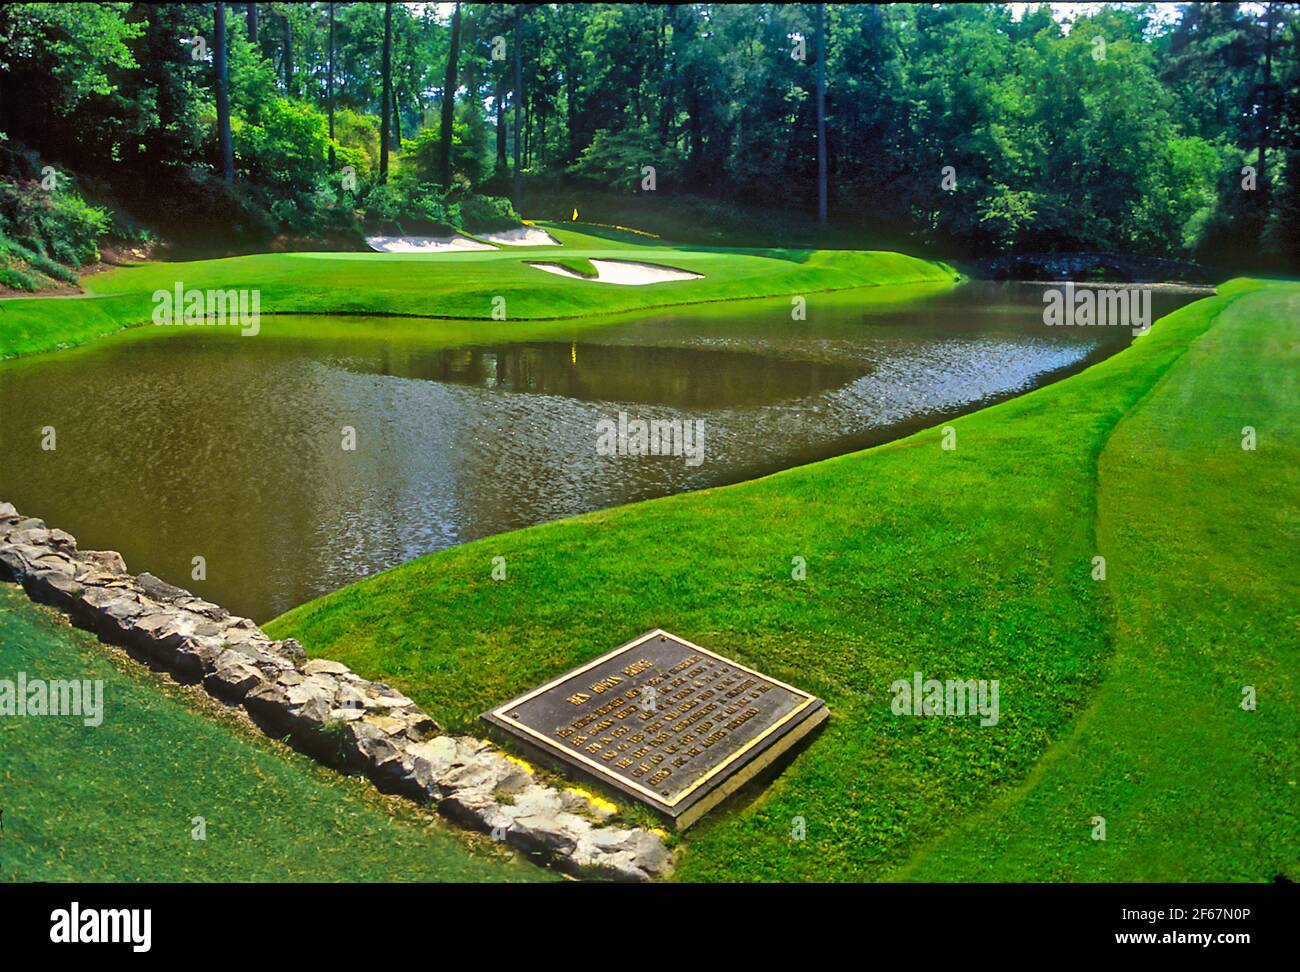 Augusta National Golf Club, Home of golf's MASTERS TOURNAMENT here the  famous par three 12th hole at the heart of Amen Corner with famous HOGAN  BRIDGE in foreground Stock Photo - Alamy